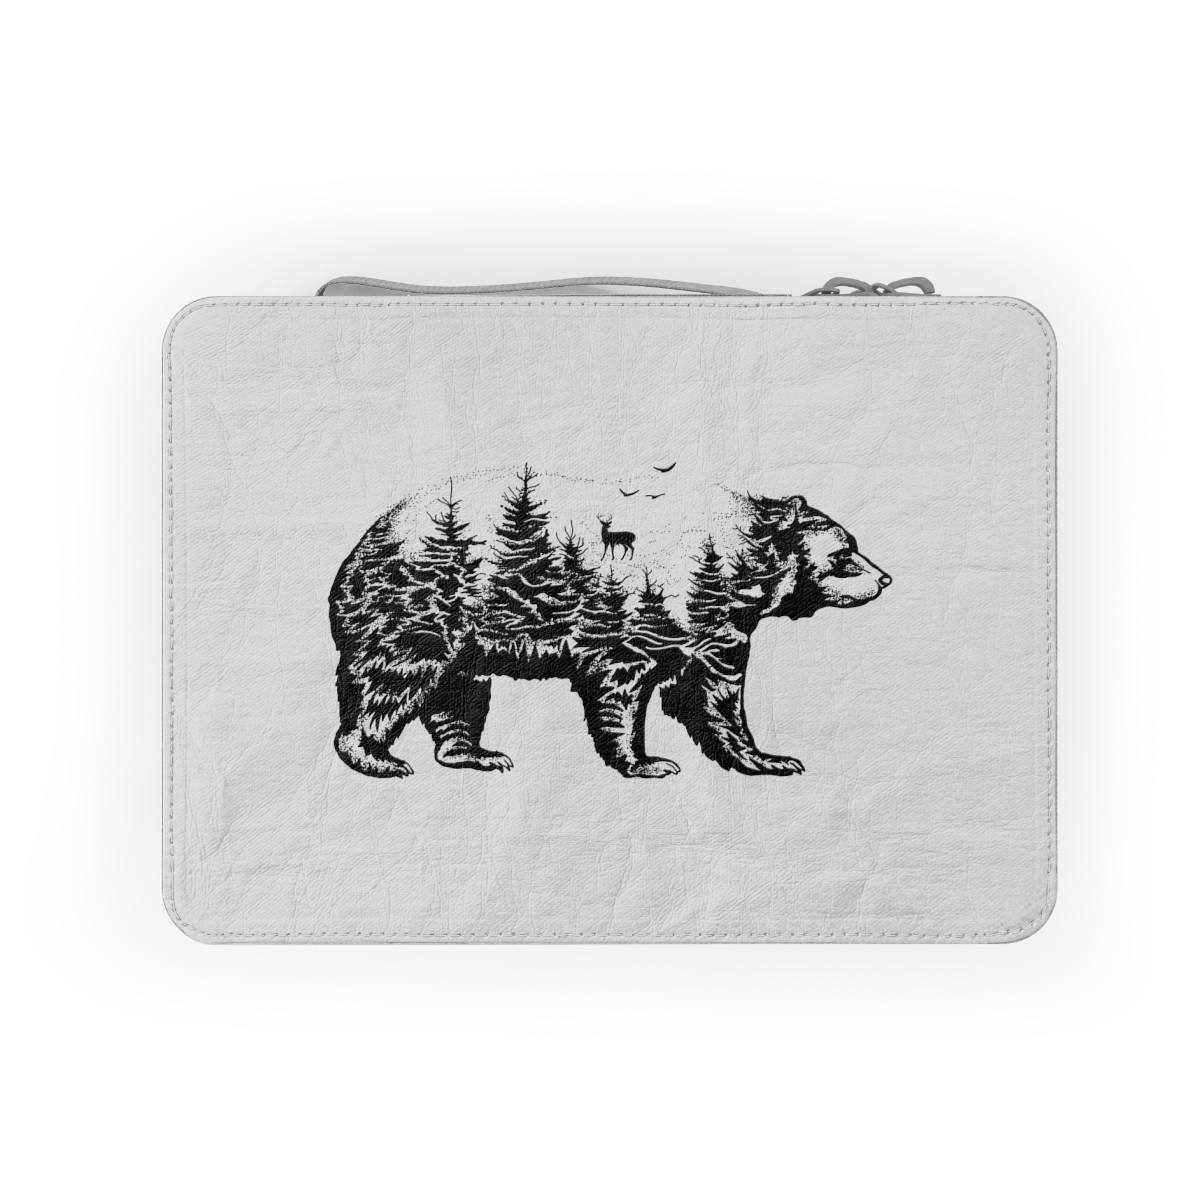 Primary image for Personalized Paper Lunch Bag with Forest Bear Design | Zipper Closure, Cotton St